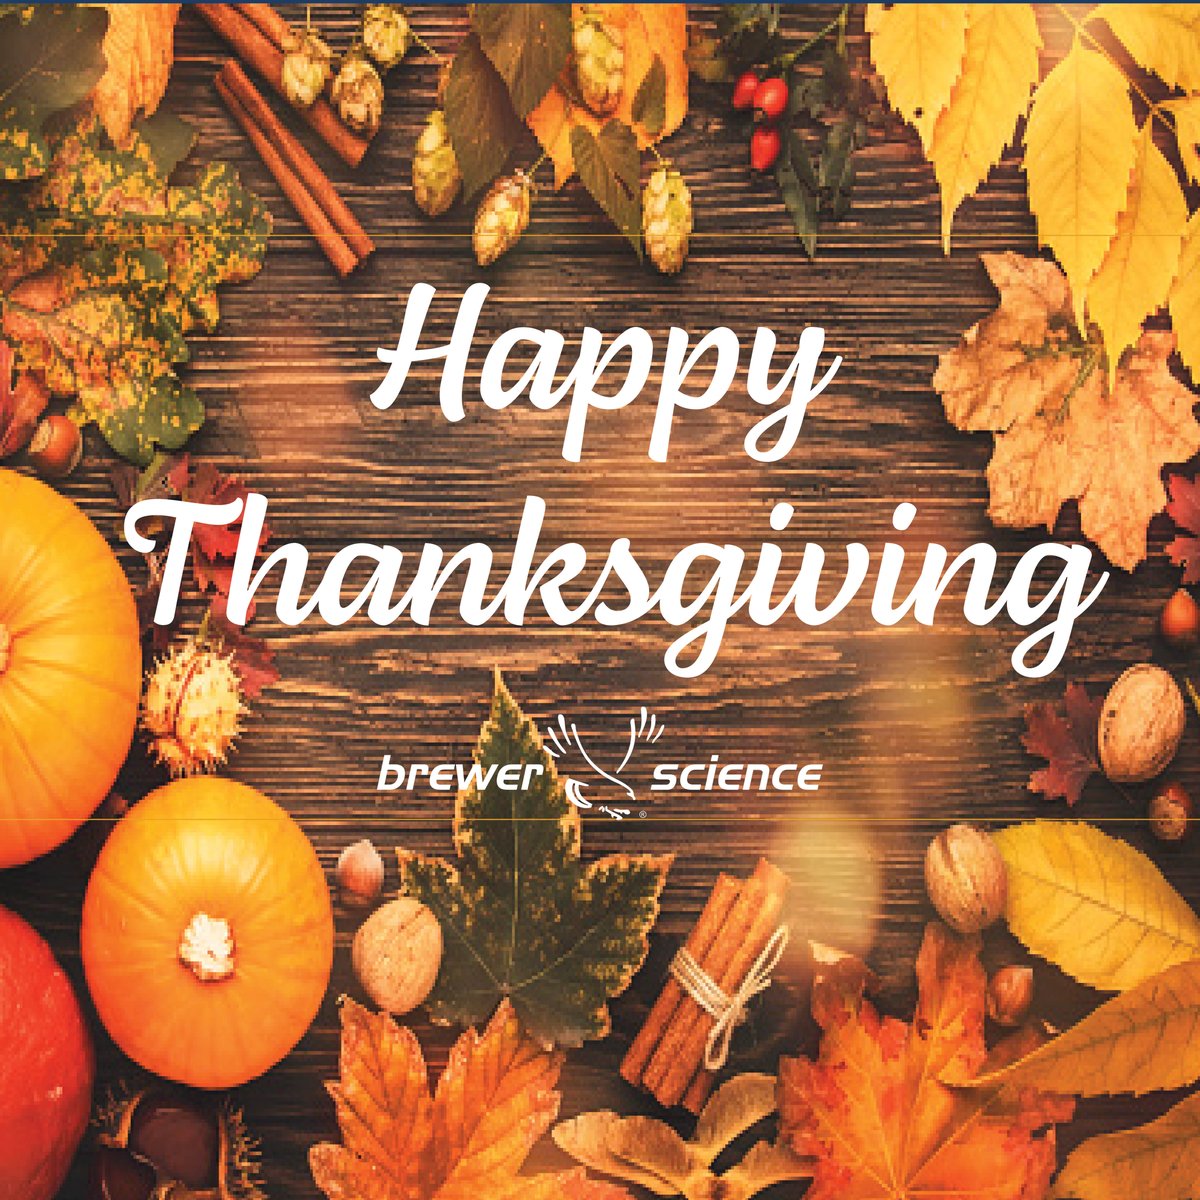 test Twitter Media - Thanksgiving is a time to remember everything we’re #thankful for. Brewer Science is grateful for our customers & partners, our community, & most importantly, our amazing employees. We wouldn’t be here today without them. We’d like to wish a very happy Thanksgiving to all! https://t.co/E8F45ioFuM